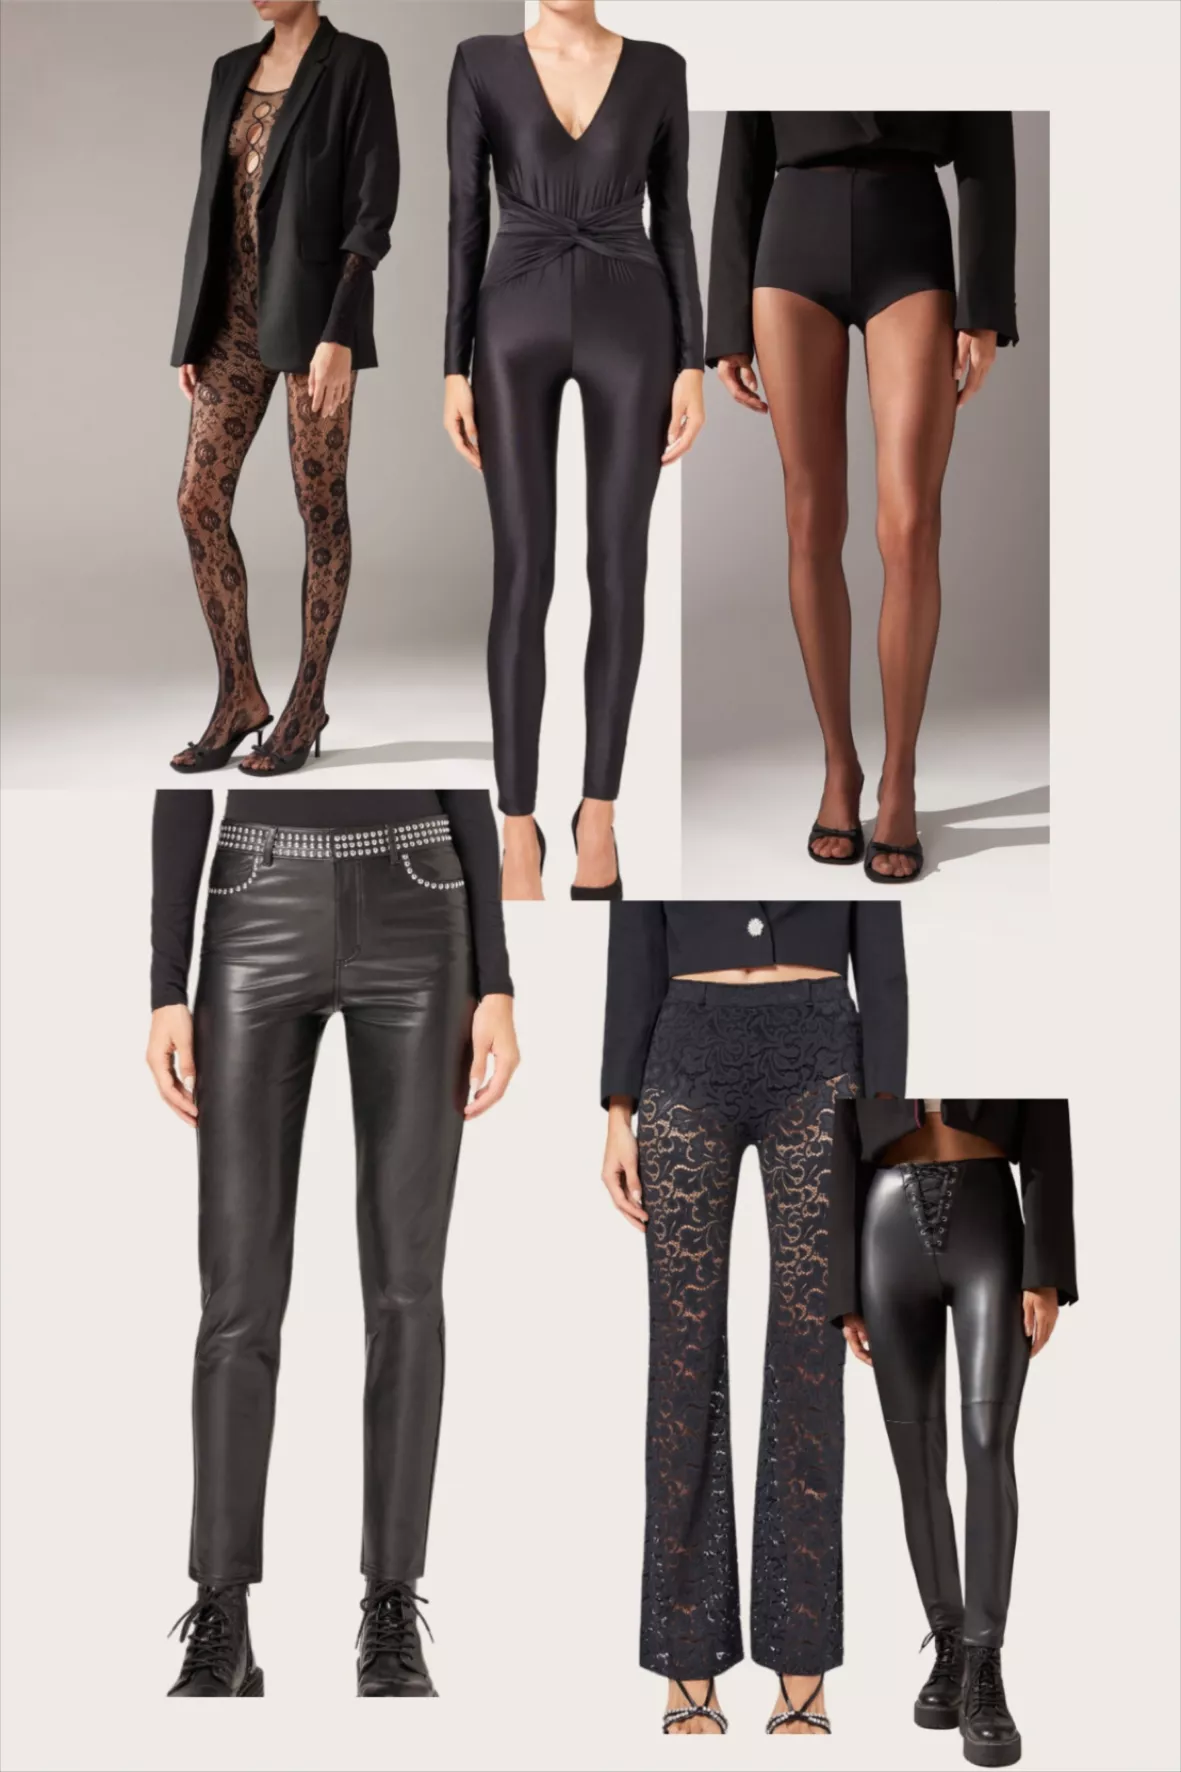 Calzedonia Floral Lace Tights